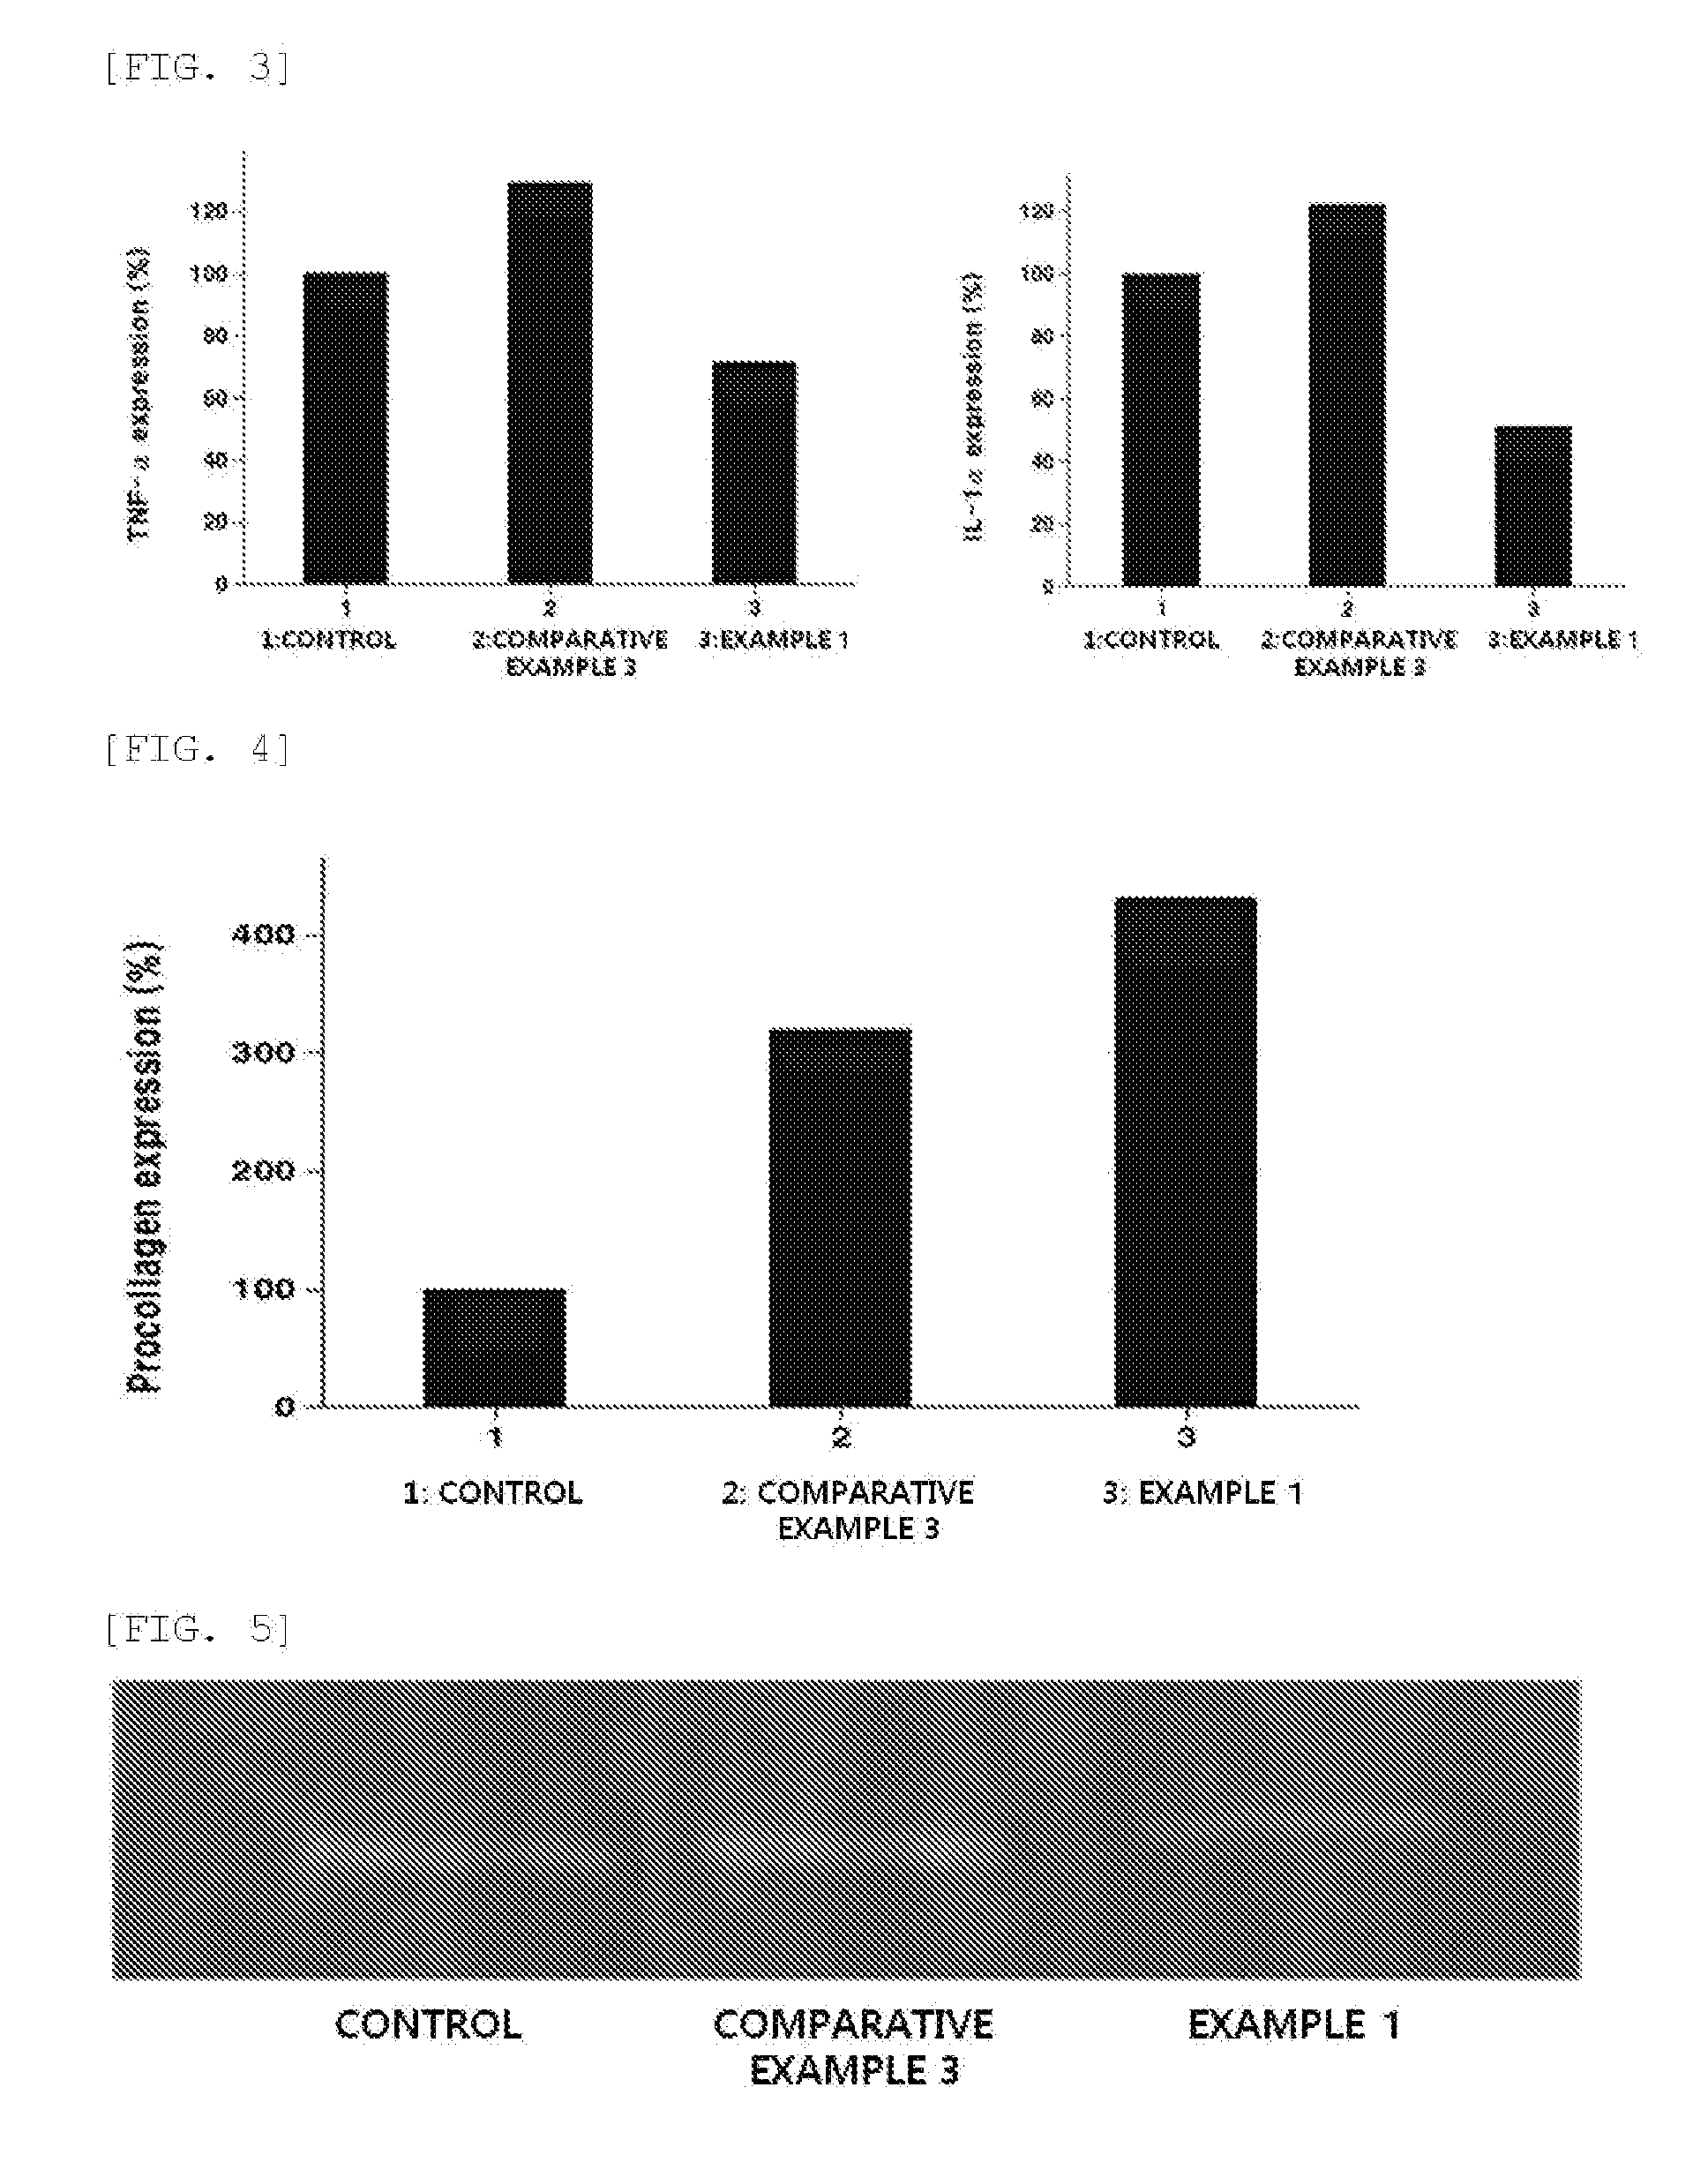 Cosmetic composition containing retinol stabilized by porous polymer beads and nanoemulsion